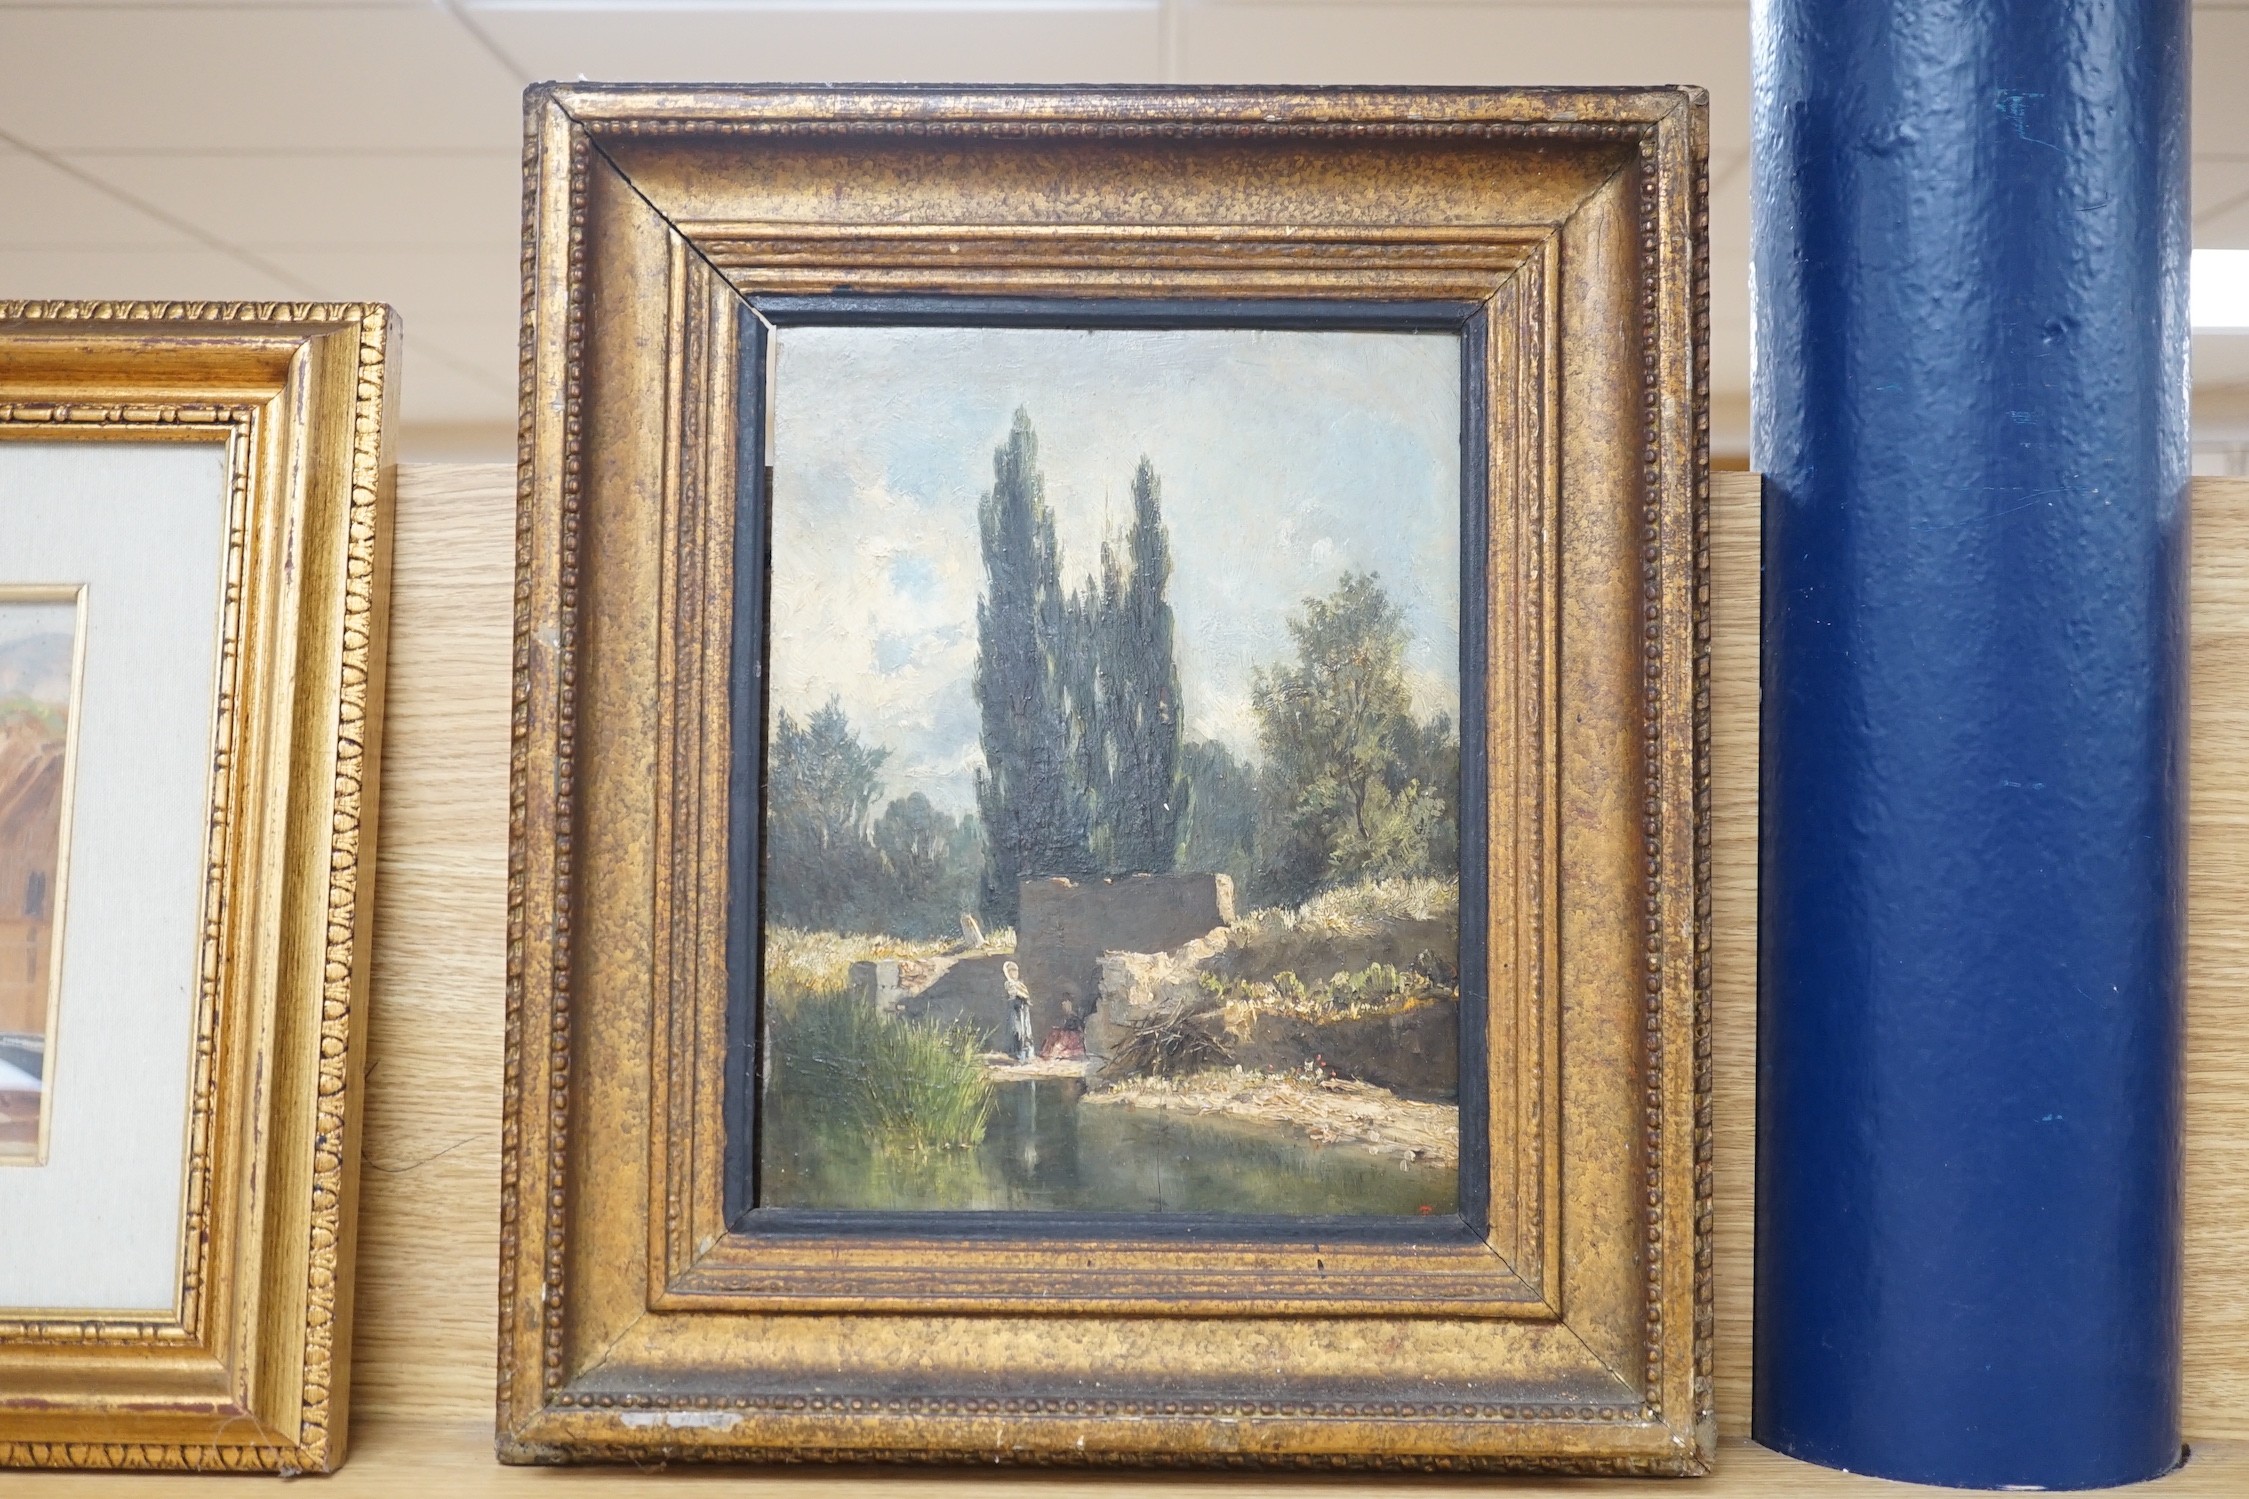 19th century Italian School, oil on wooden panel, River landscape with standing figure, monogrammed JT, 30 x 23cm